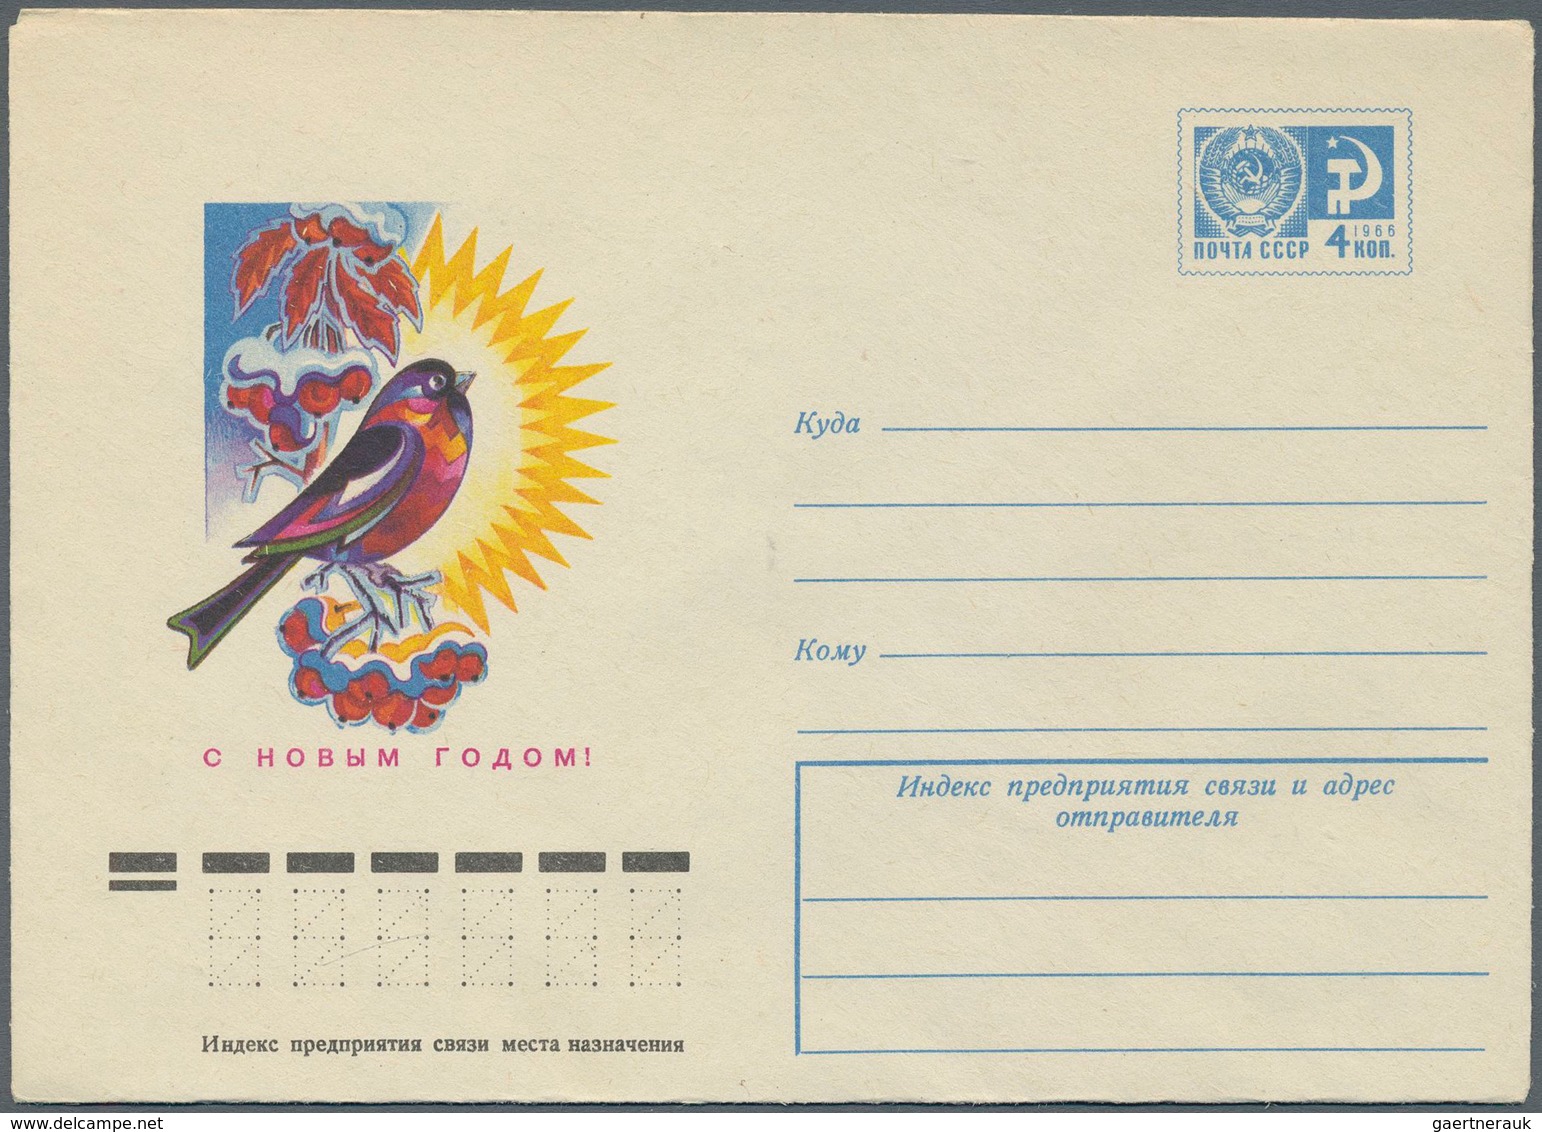 25818 Thematik: Tiere-Vögel / animals-birds: 1953/1990, USSR. Lot of about 600 only different entire envel